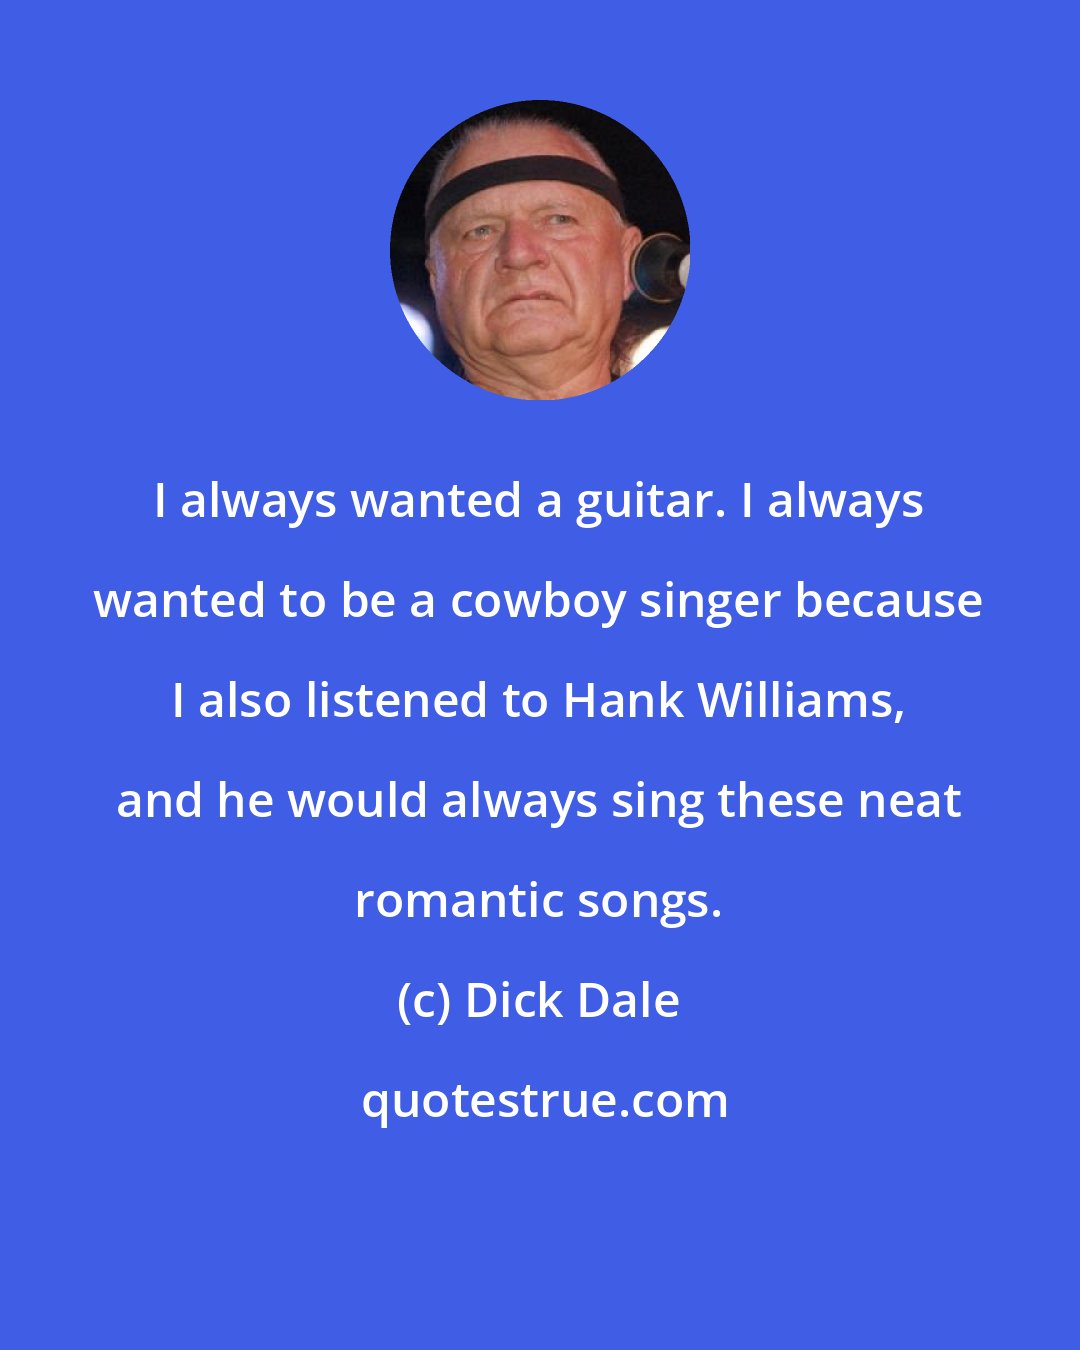 Dick Dale: I always wanted a guitar. I always wanted to be a cowboy singer because I also listened to Hank Williams, and he would always sing these neat romantic songs.